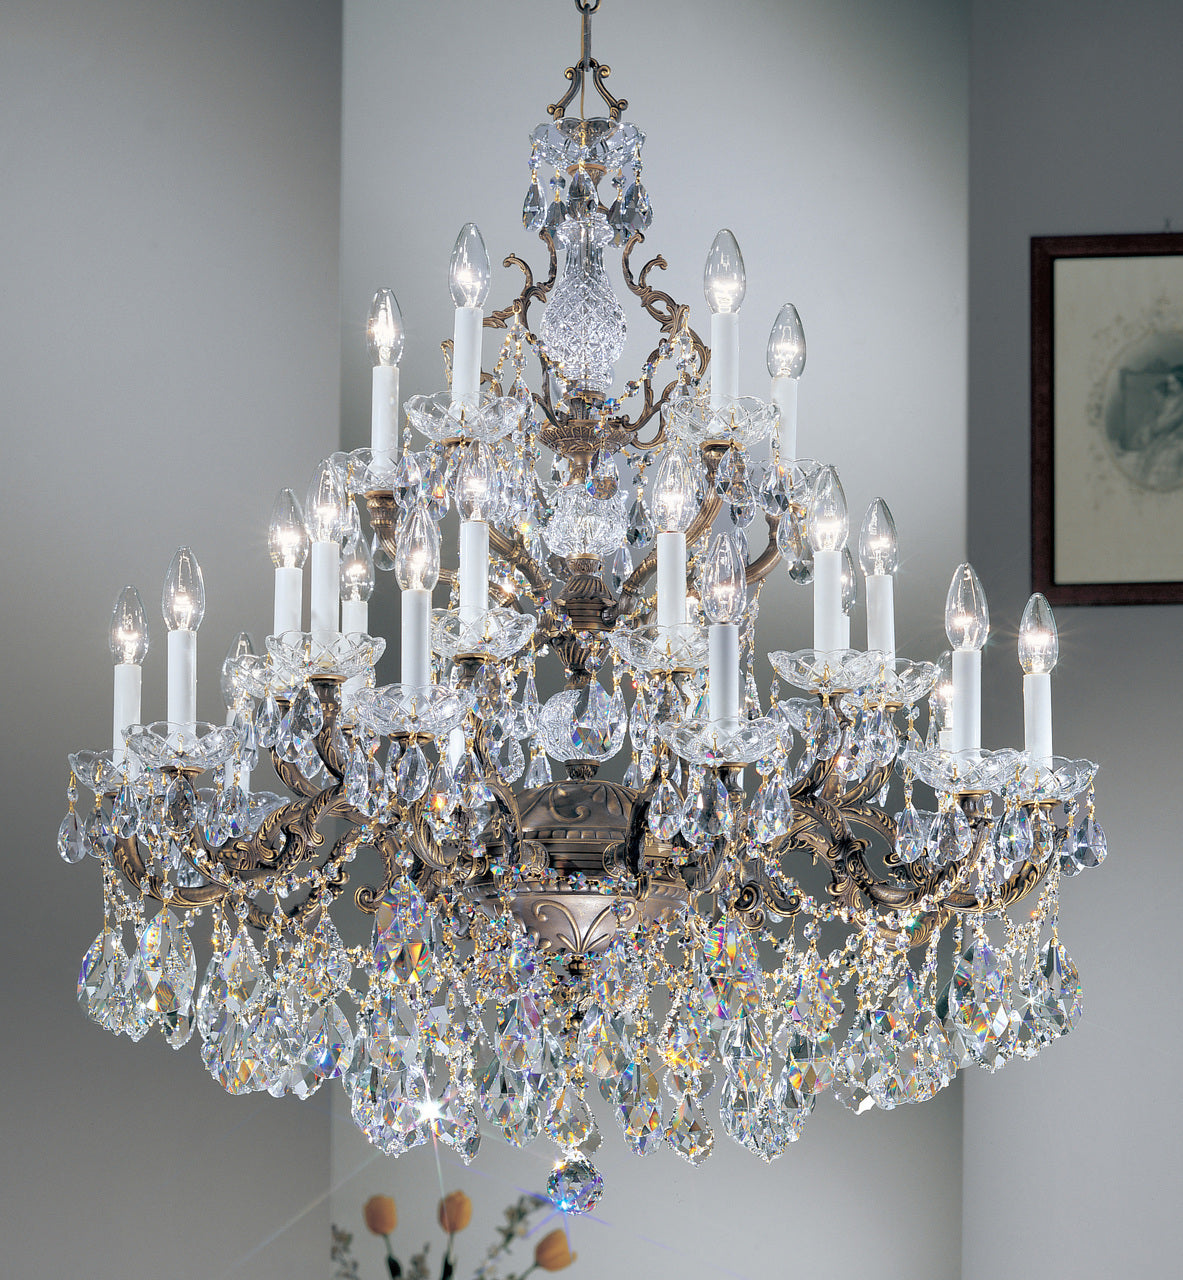 Classic Lighting 5545 RB S Madrid Imperial Crystal/Cast Brass Chandelier in Roman Bronze (Imported from Spain)